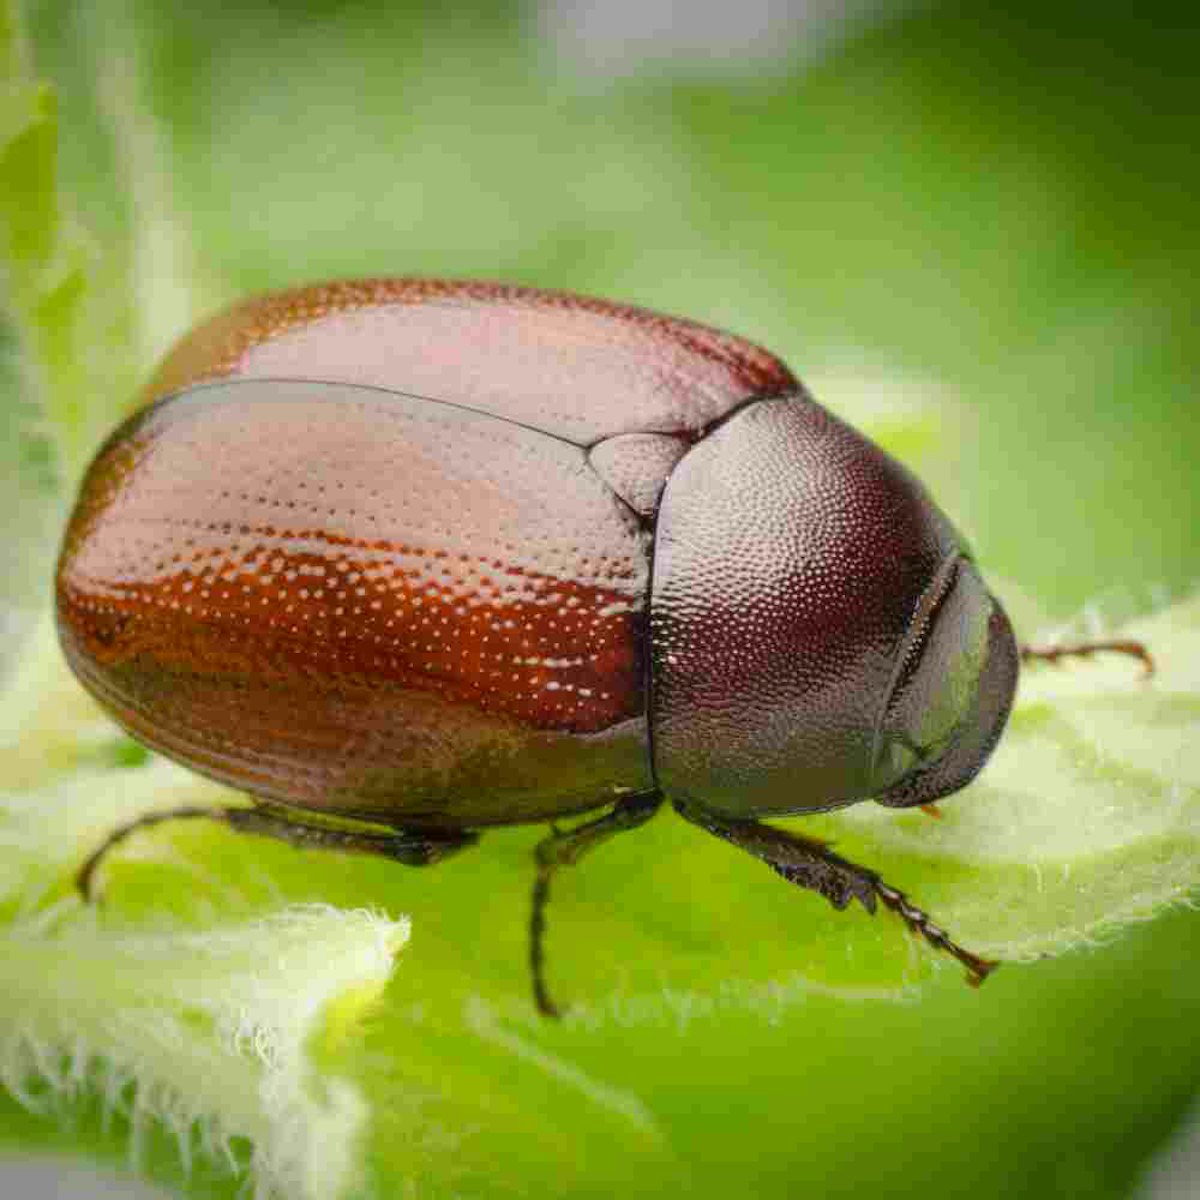 June bugs are here & their damage to your lawn is not cute